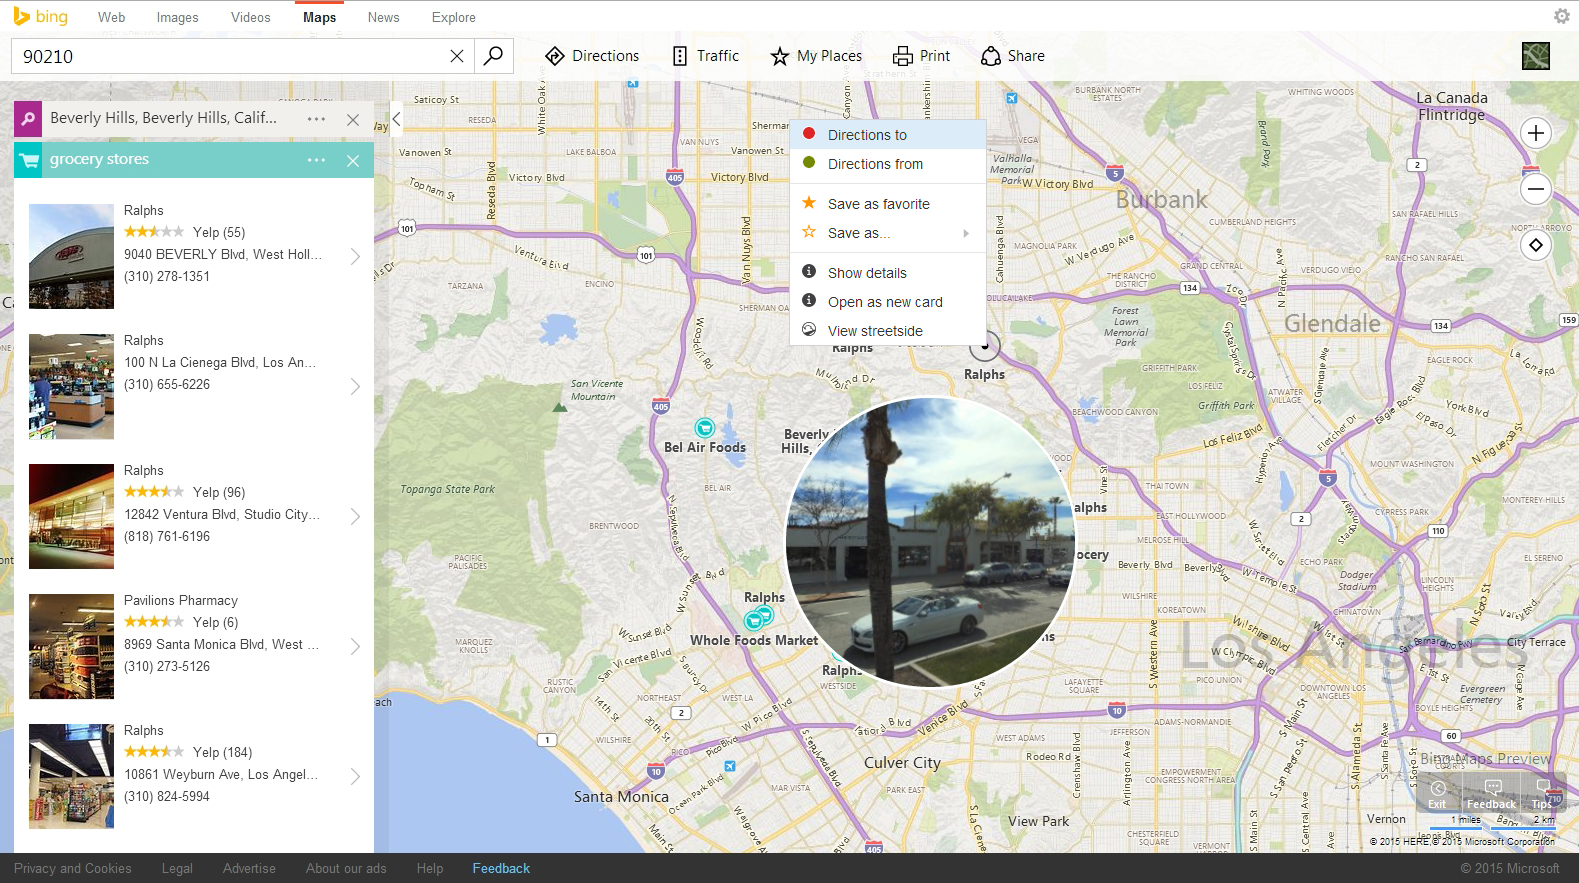 bing maps preview new redesign 2015